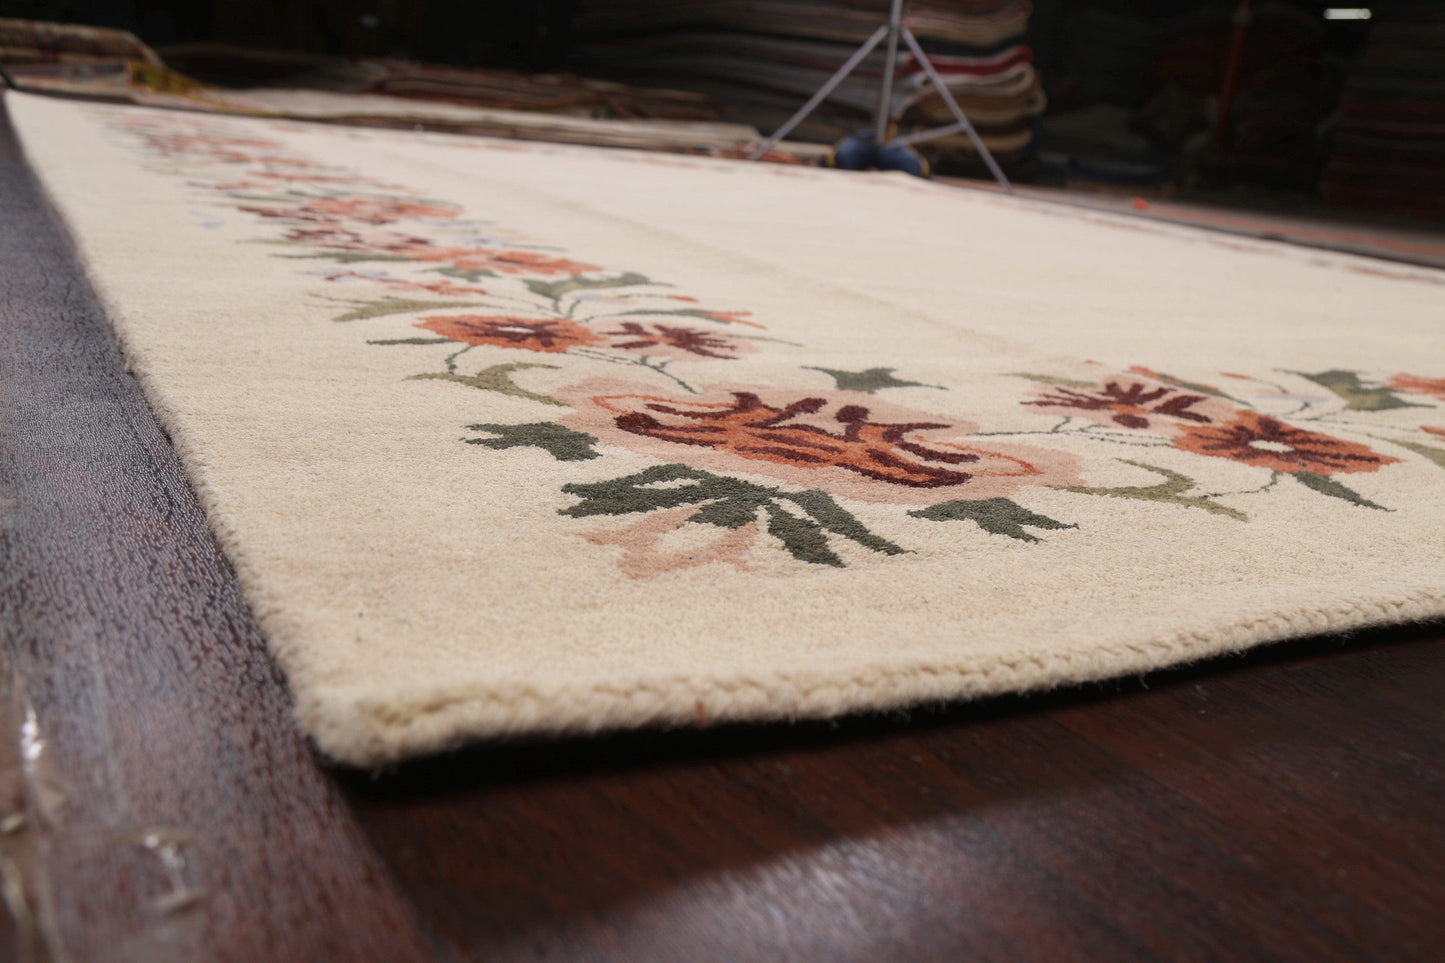 Floral Area Rug 10x13